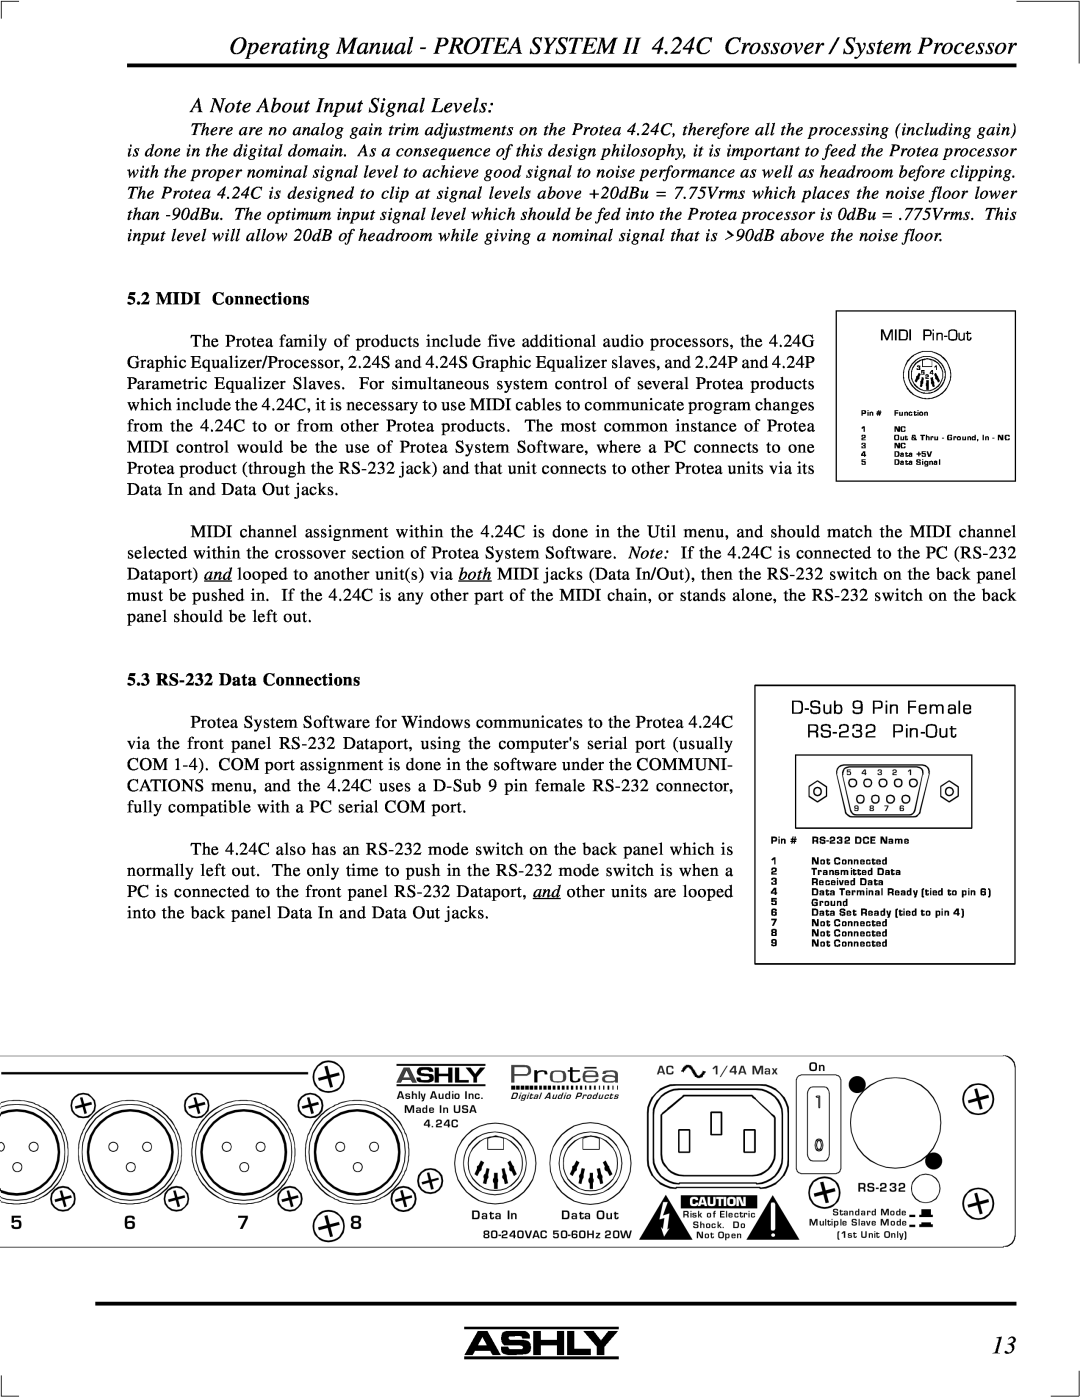 Ashly 4.24C manual A Note About Input Signal Levels, D-Sub9 Pin Female RS-232 Pin-Out, MIDI Connections 